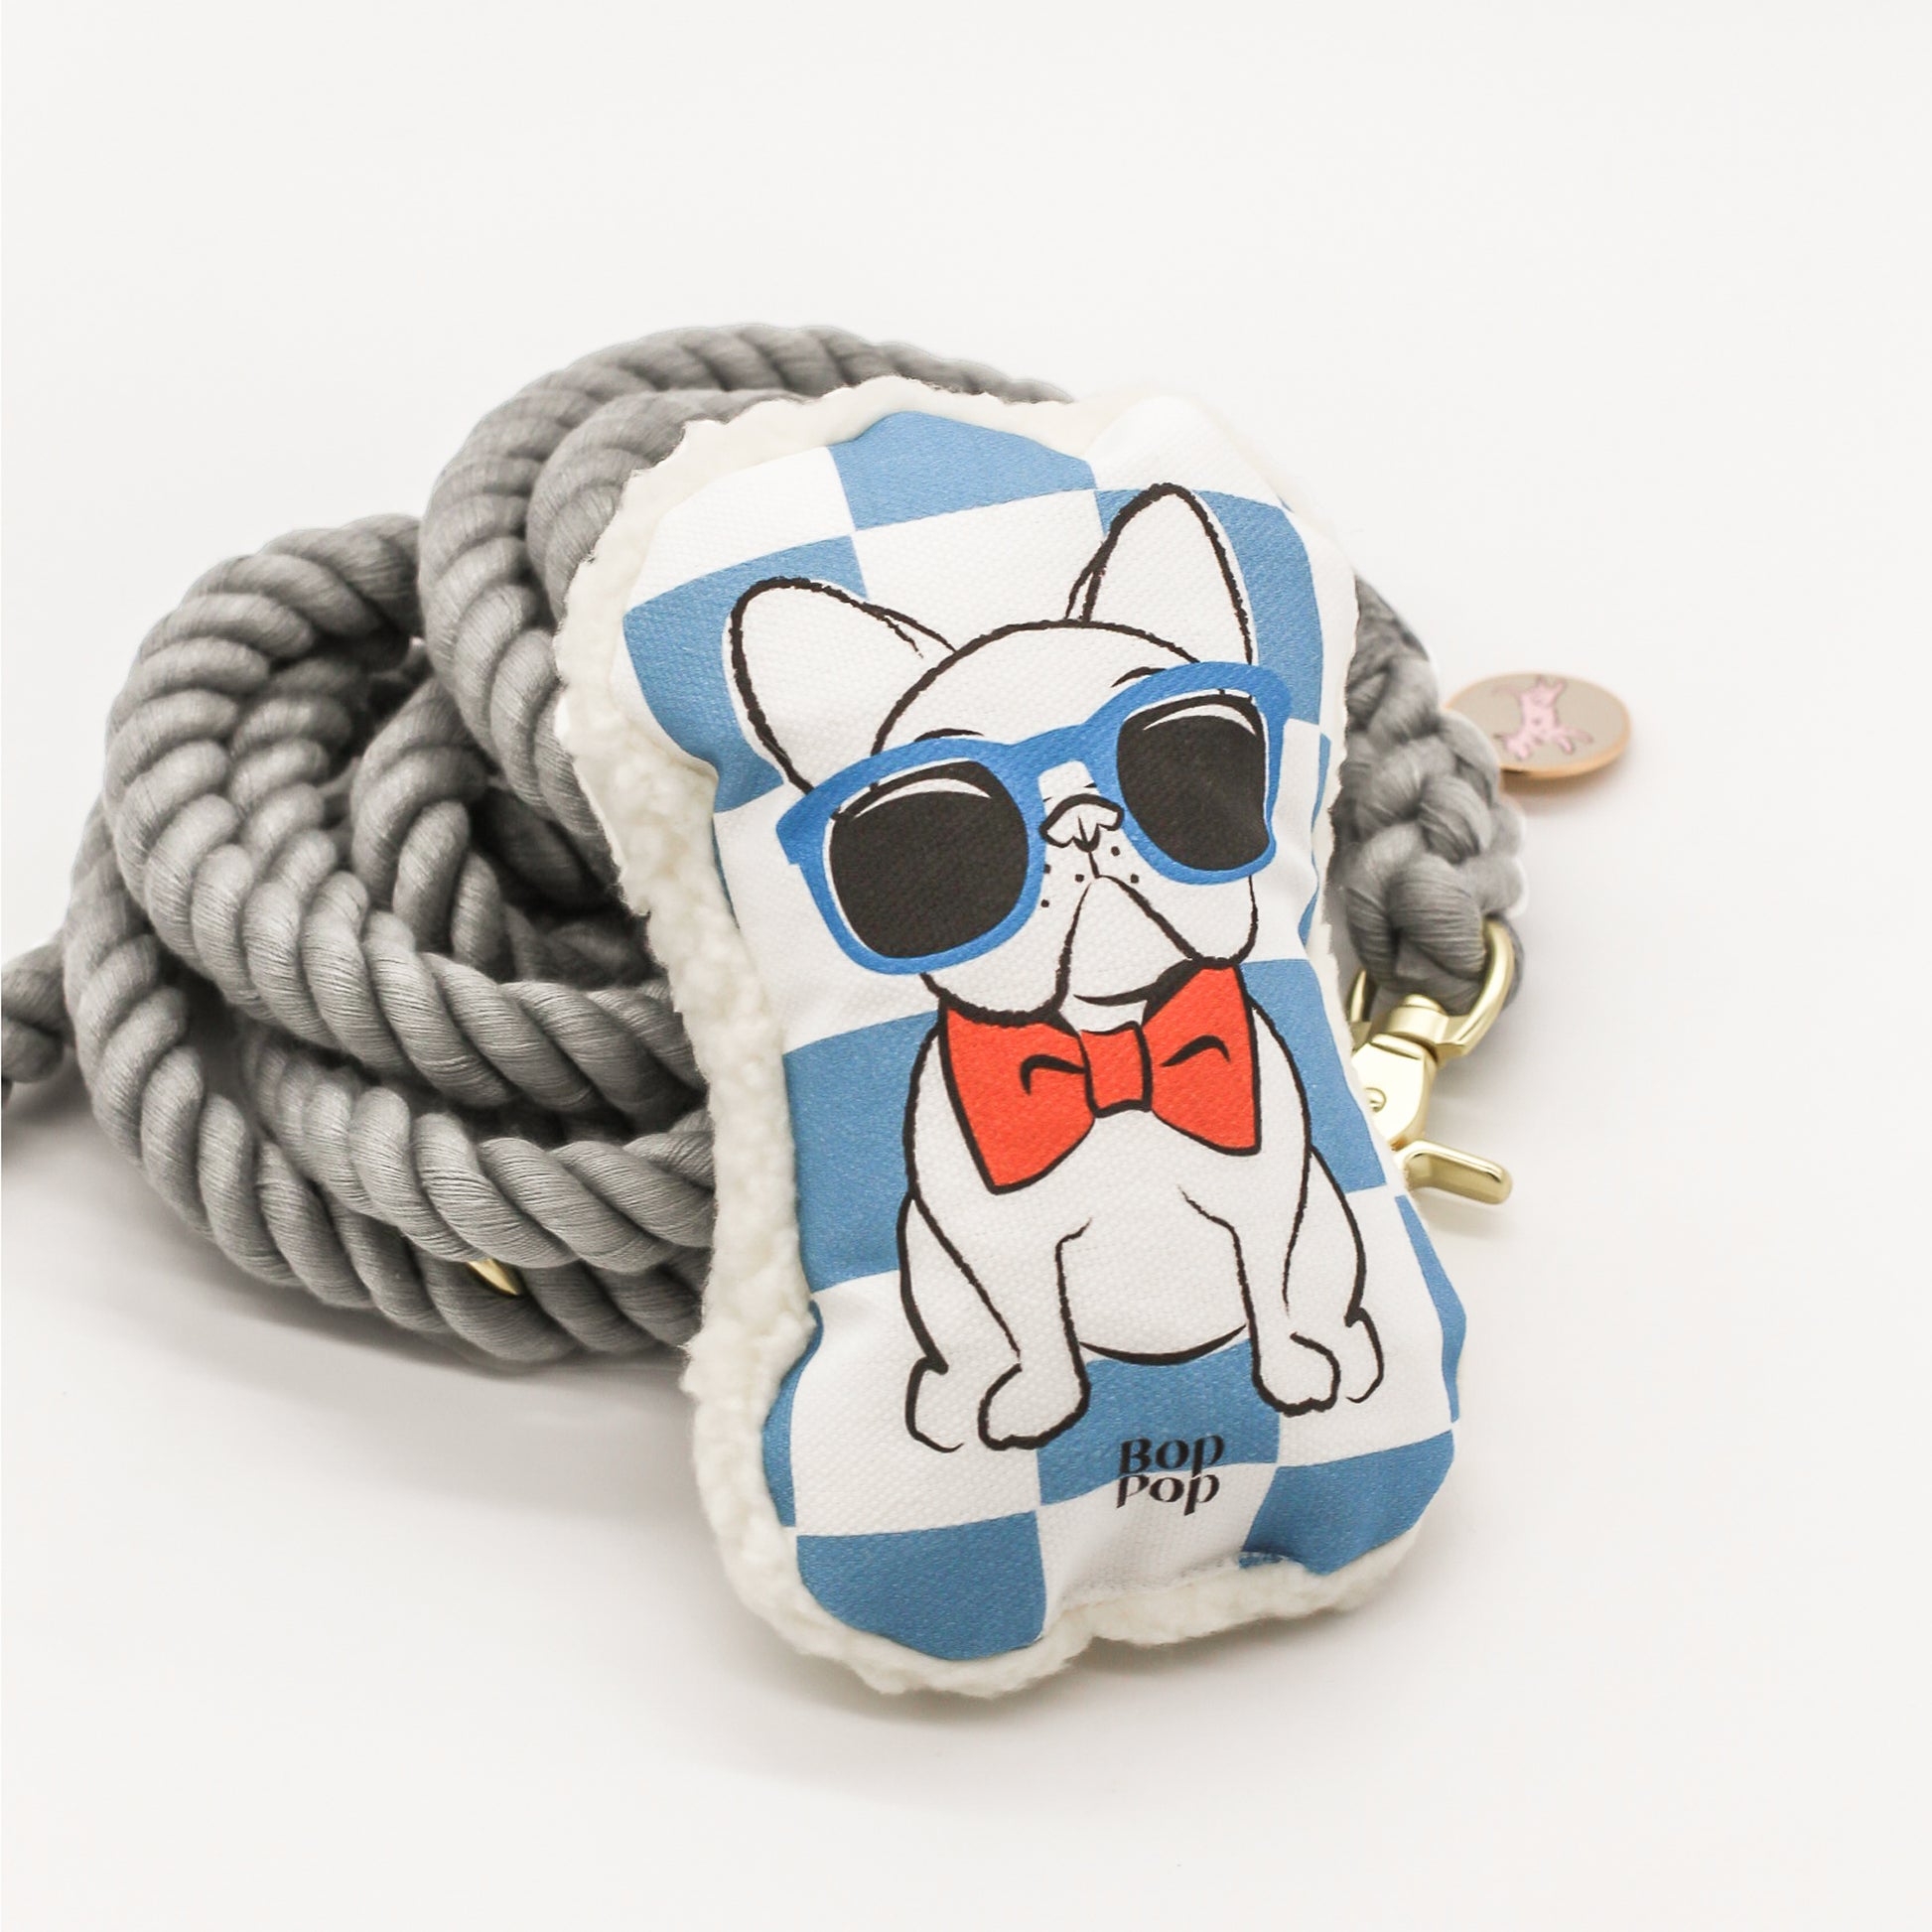 Besties Dog toy plush sherpa french bulldog frenchie with checkerboard print yellow blue with red bow tie and blue sunglasses. Dog accessories